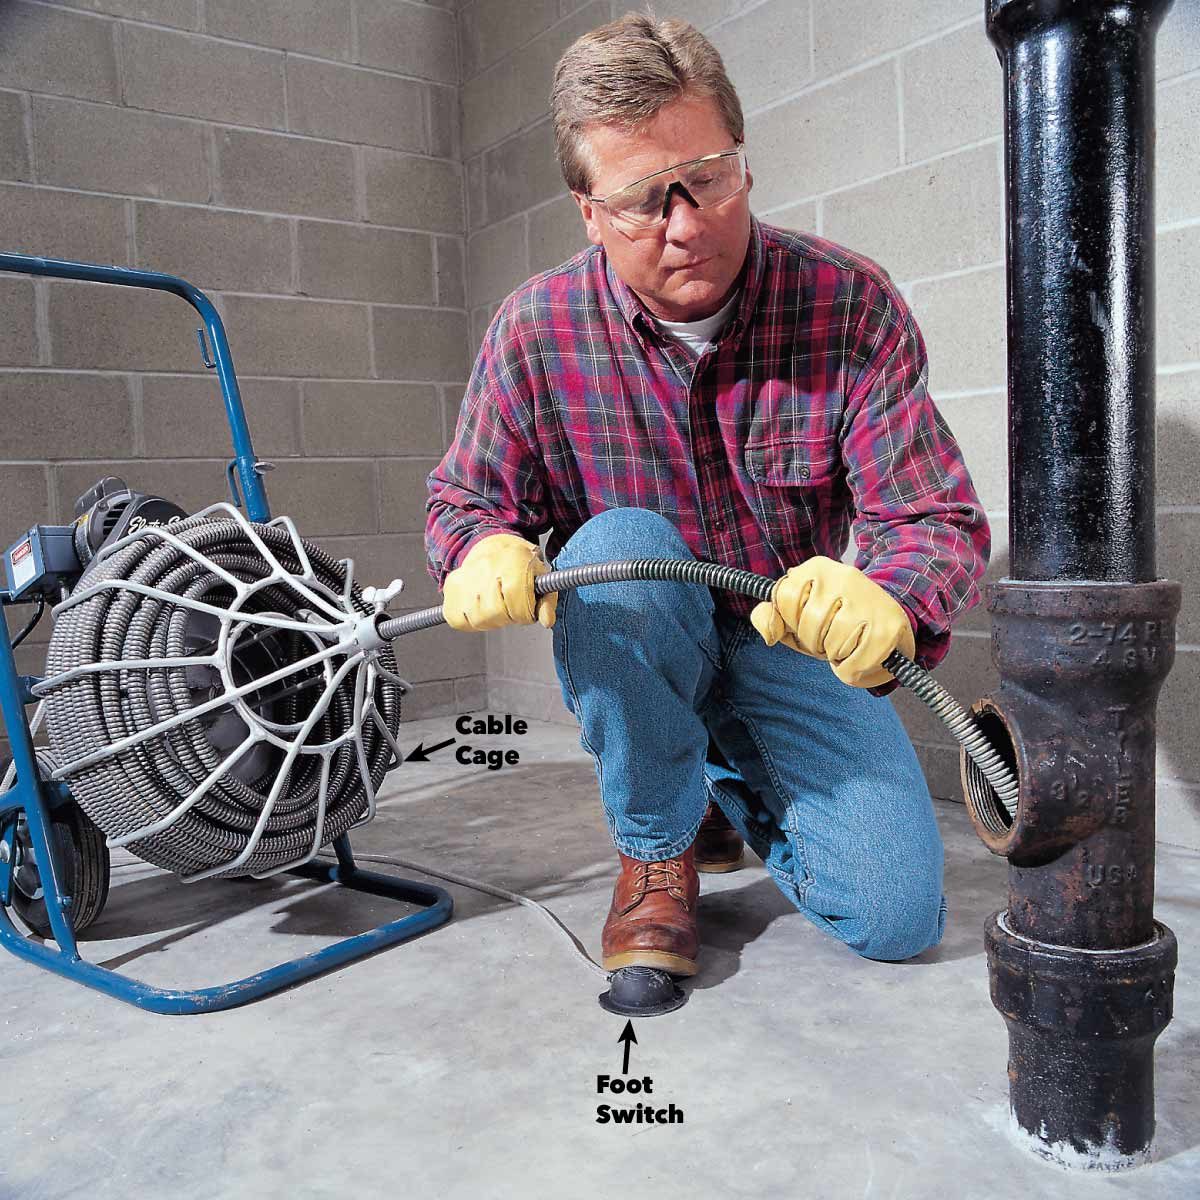 How to Unclog a Floor Drain